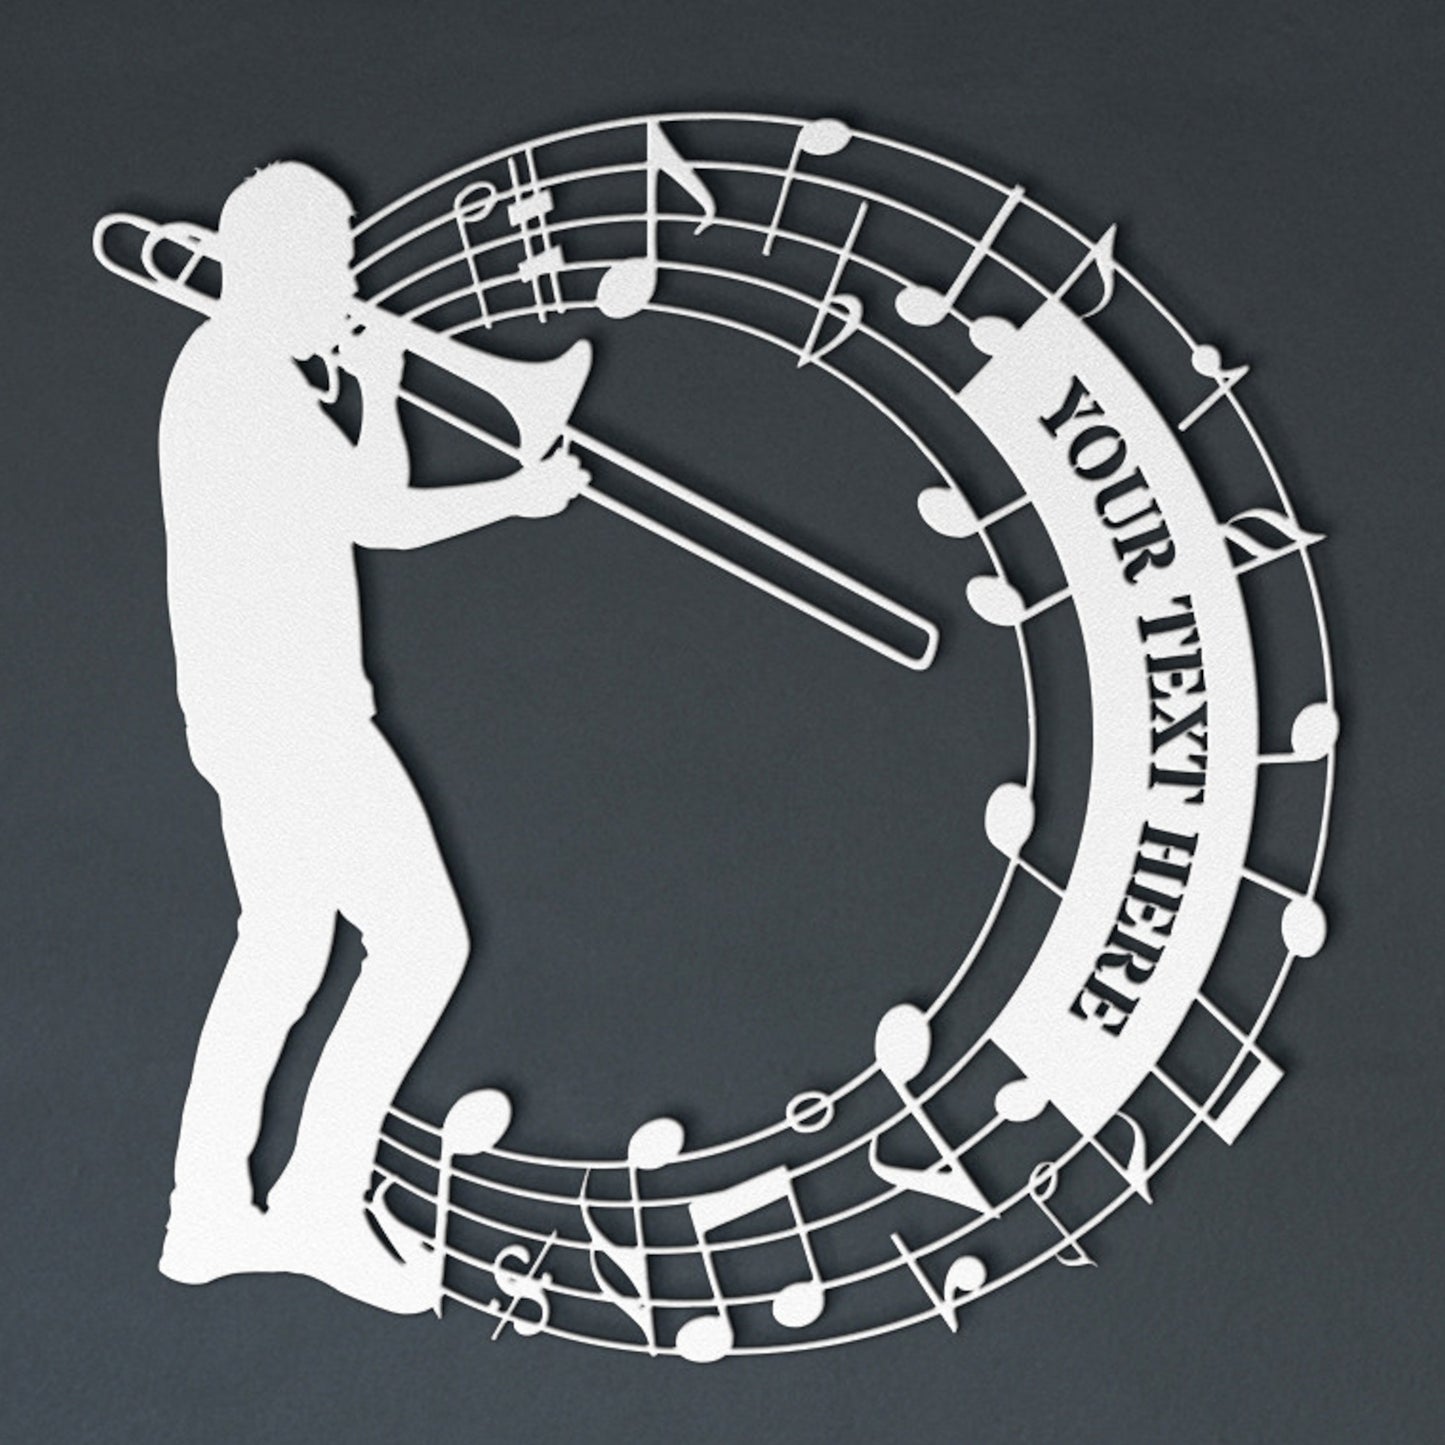 Personalized Trombone Player In Notes Name Metal Sign. Custom Music Lover Decor Gift. Musician Entertainer Gifts. Musical Wall Hanging Decor